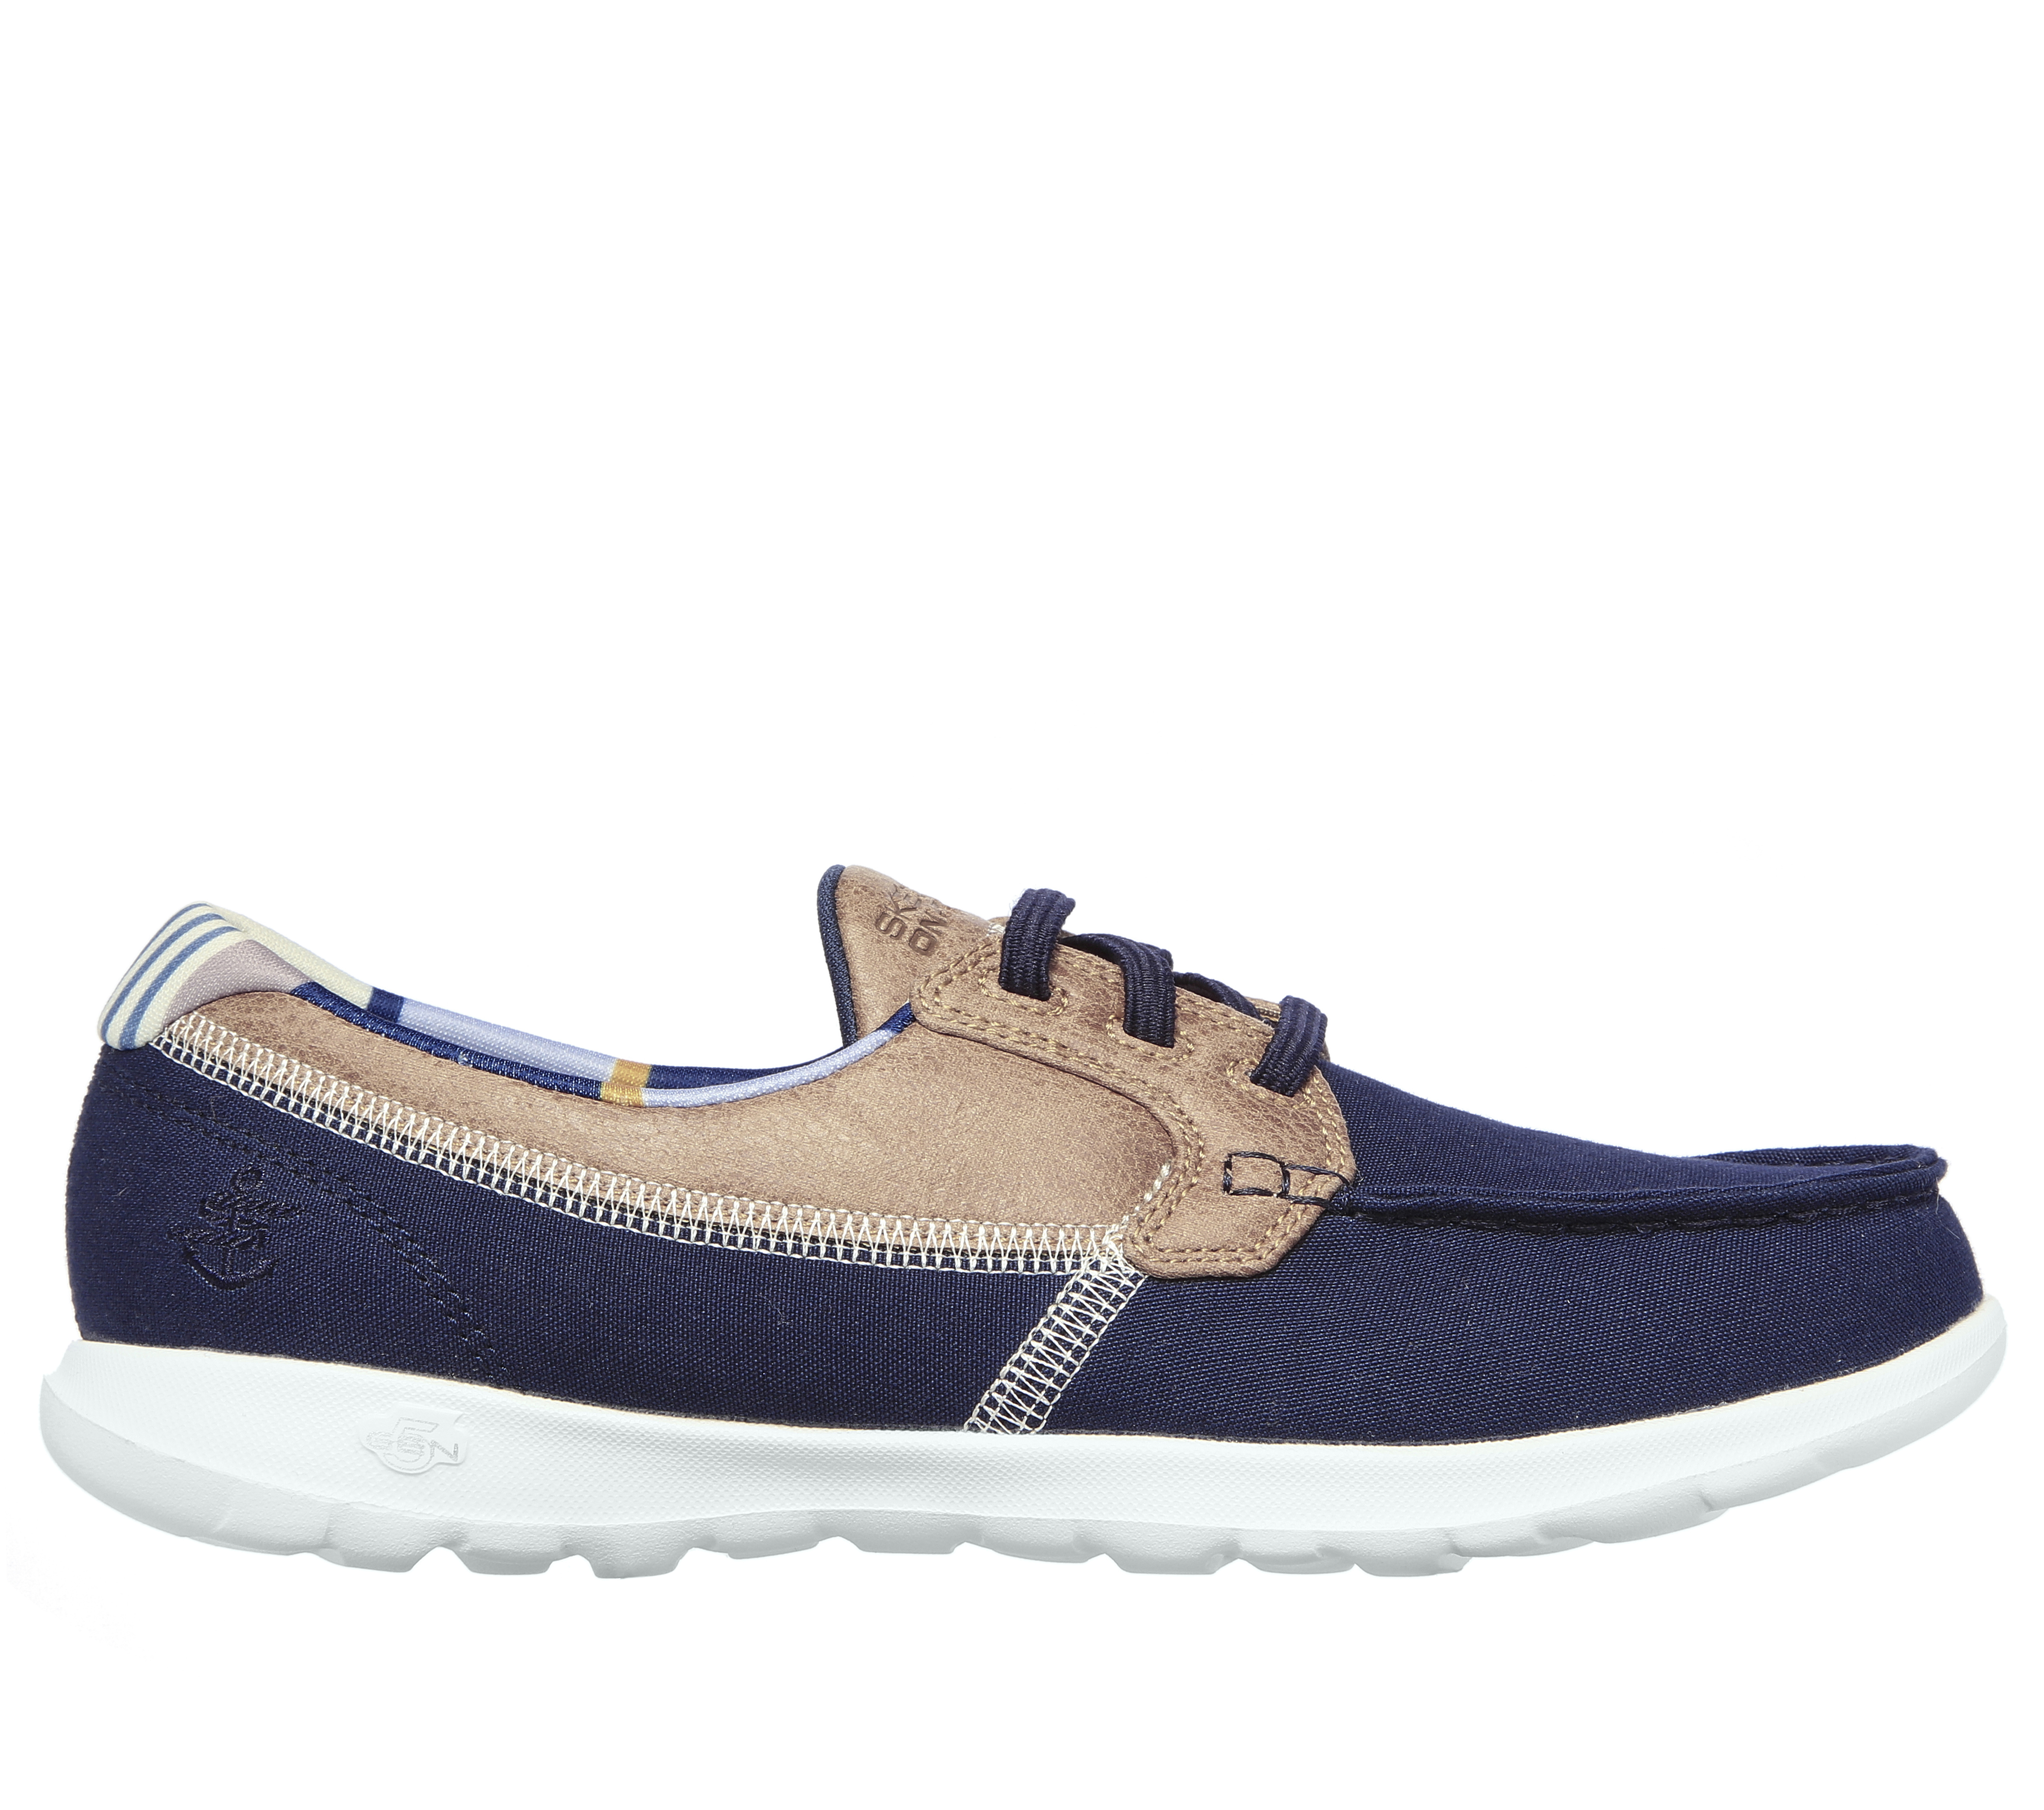 skechers on the go lace-up lightweight boat shoes